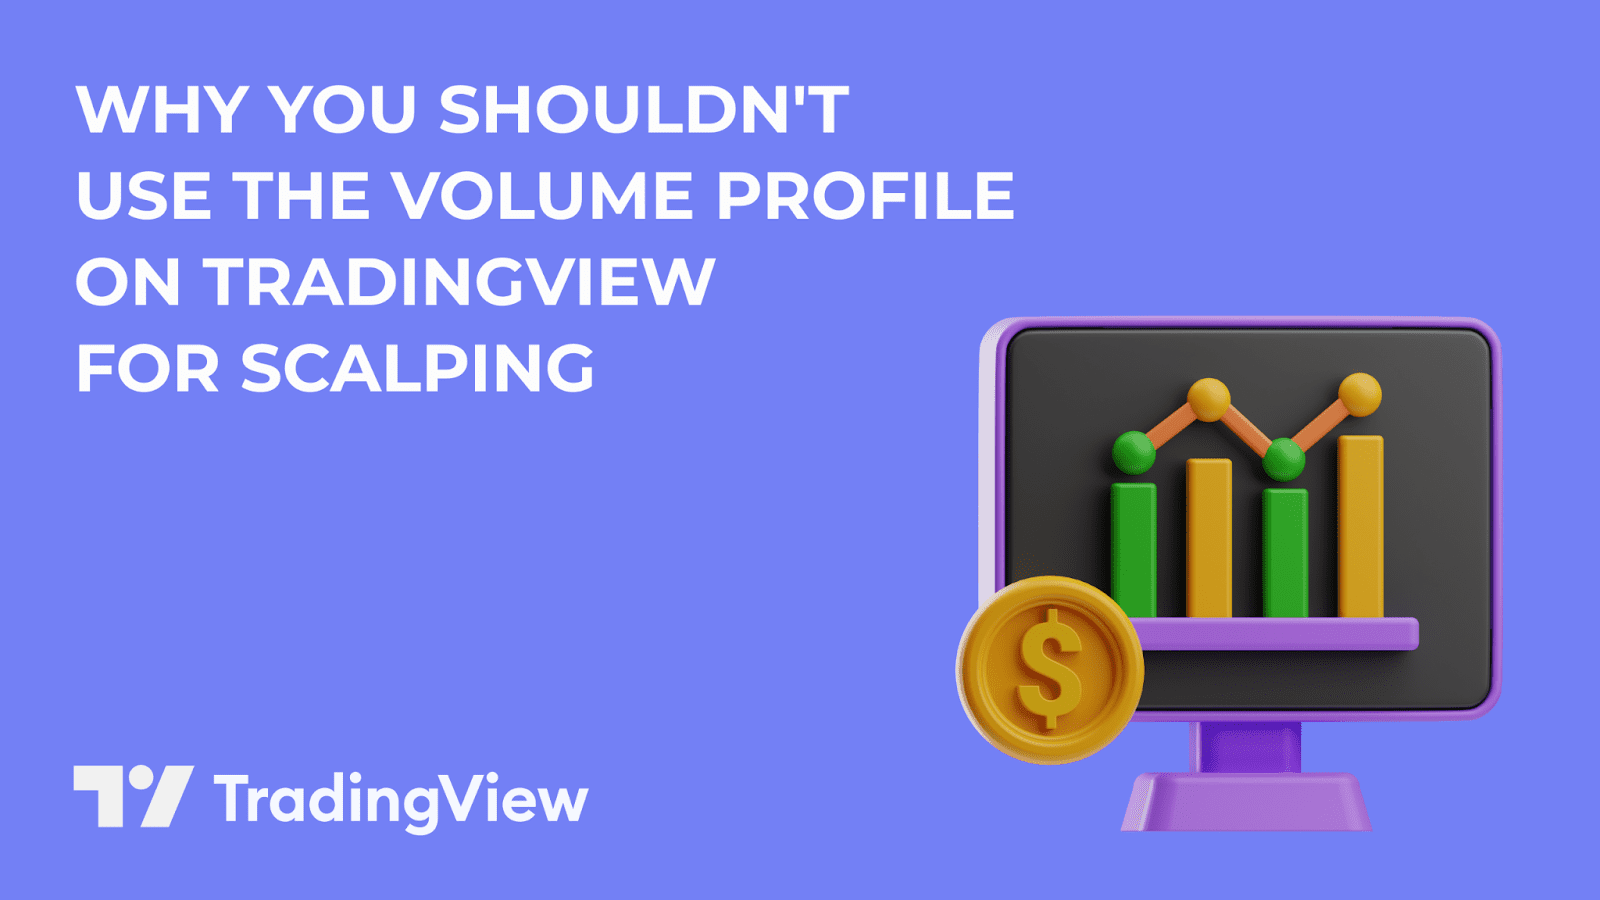 Why you shouldn't use the Volume Profile on TradingView for scalping